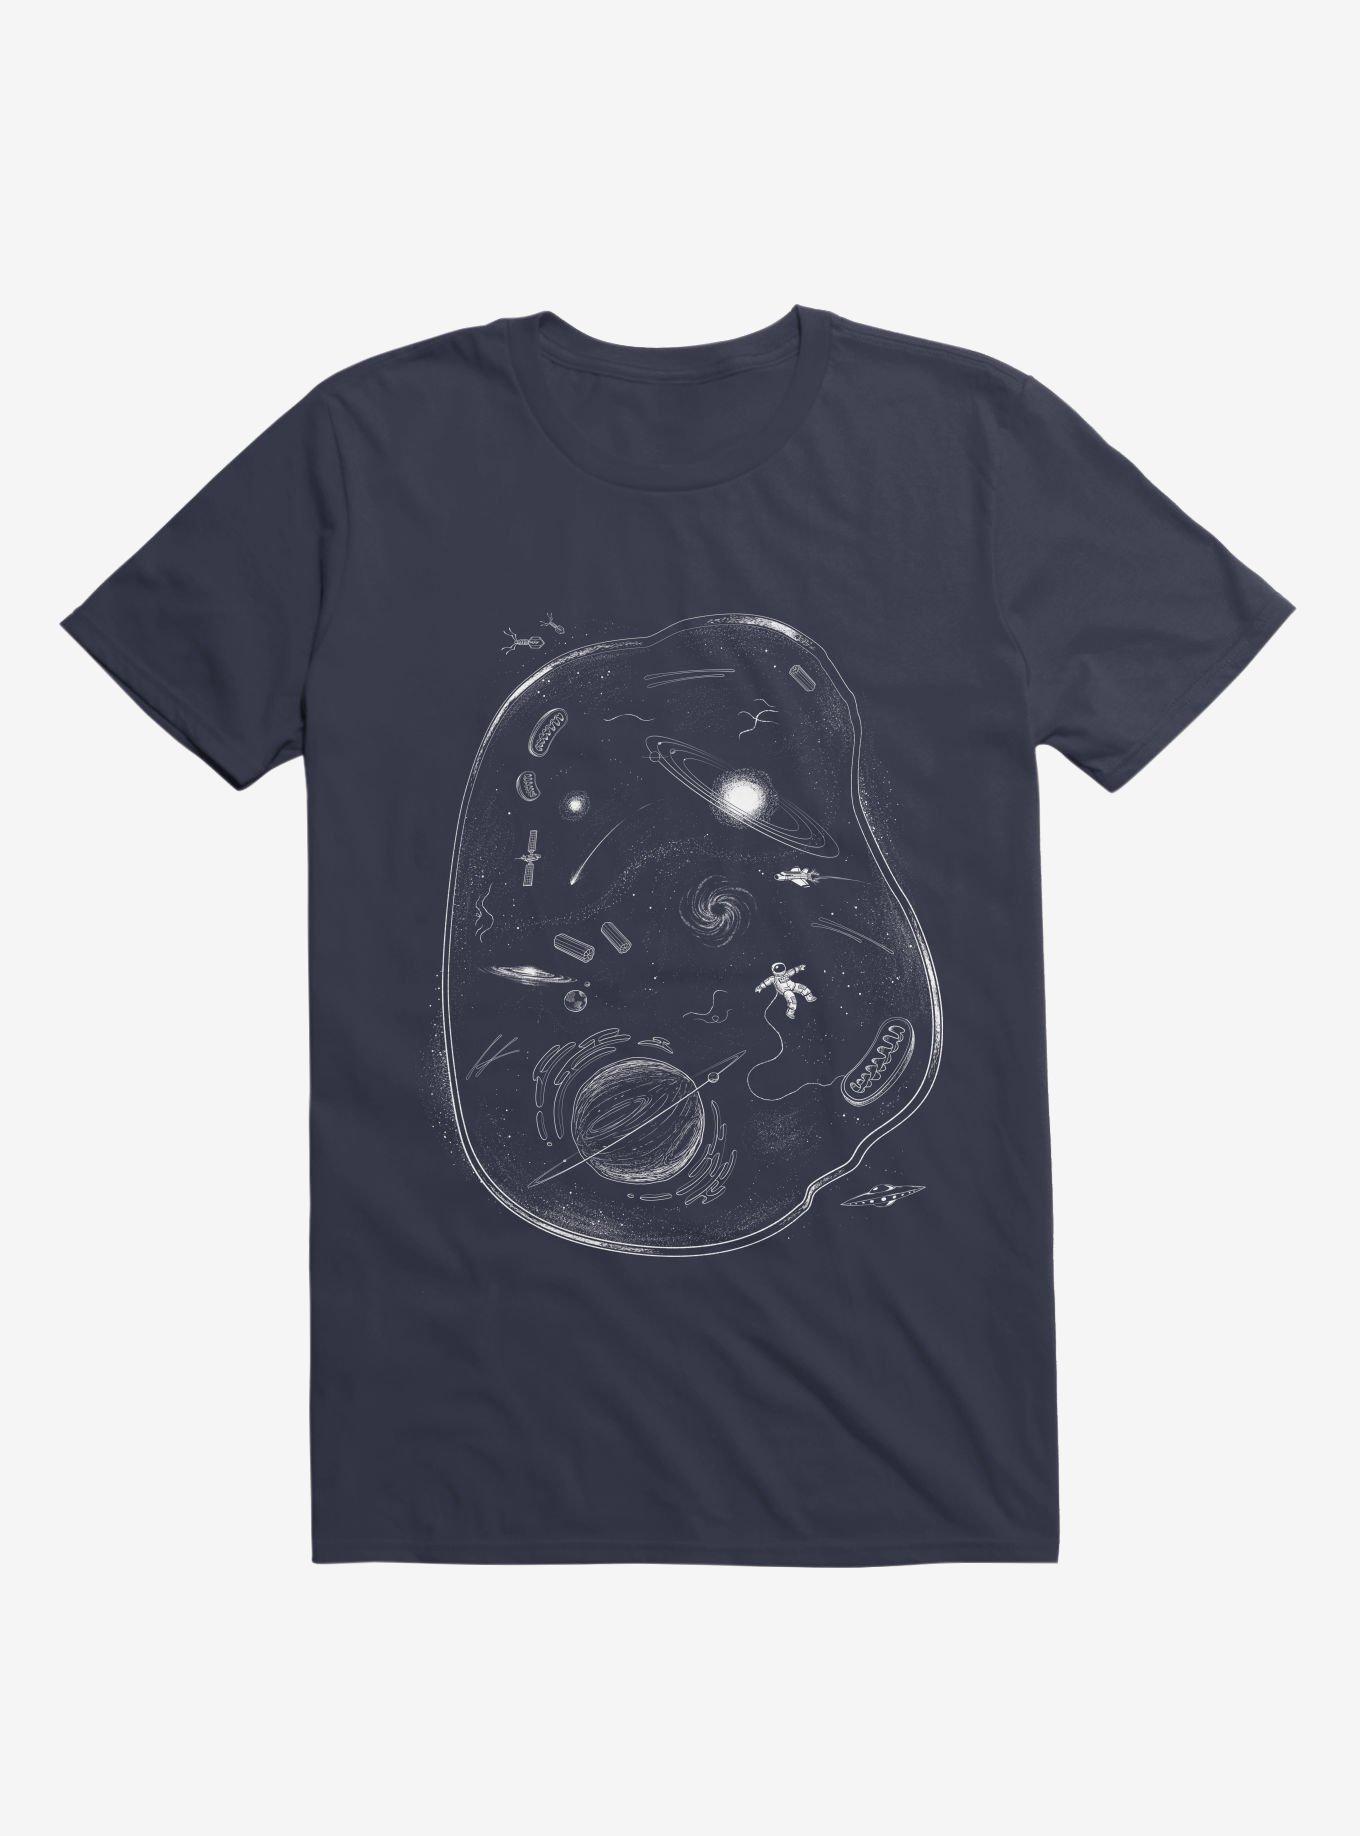 We Are Made Of Stars Navy Blue T-Shirt